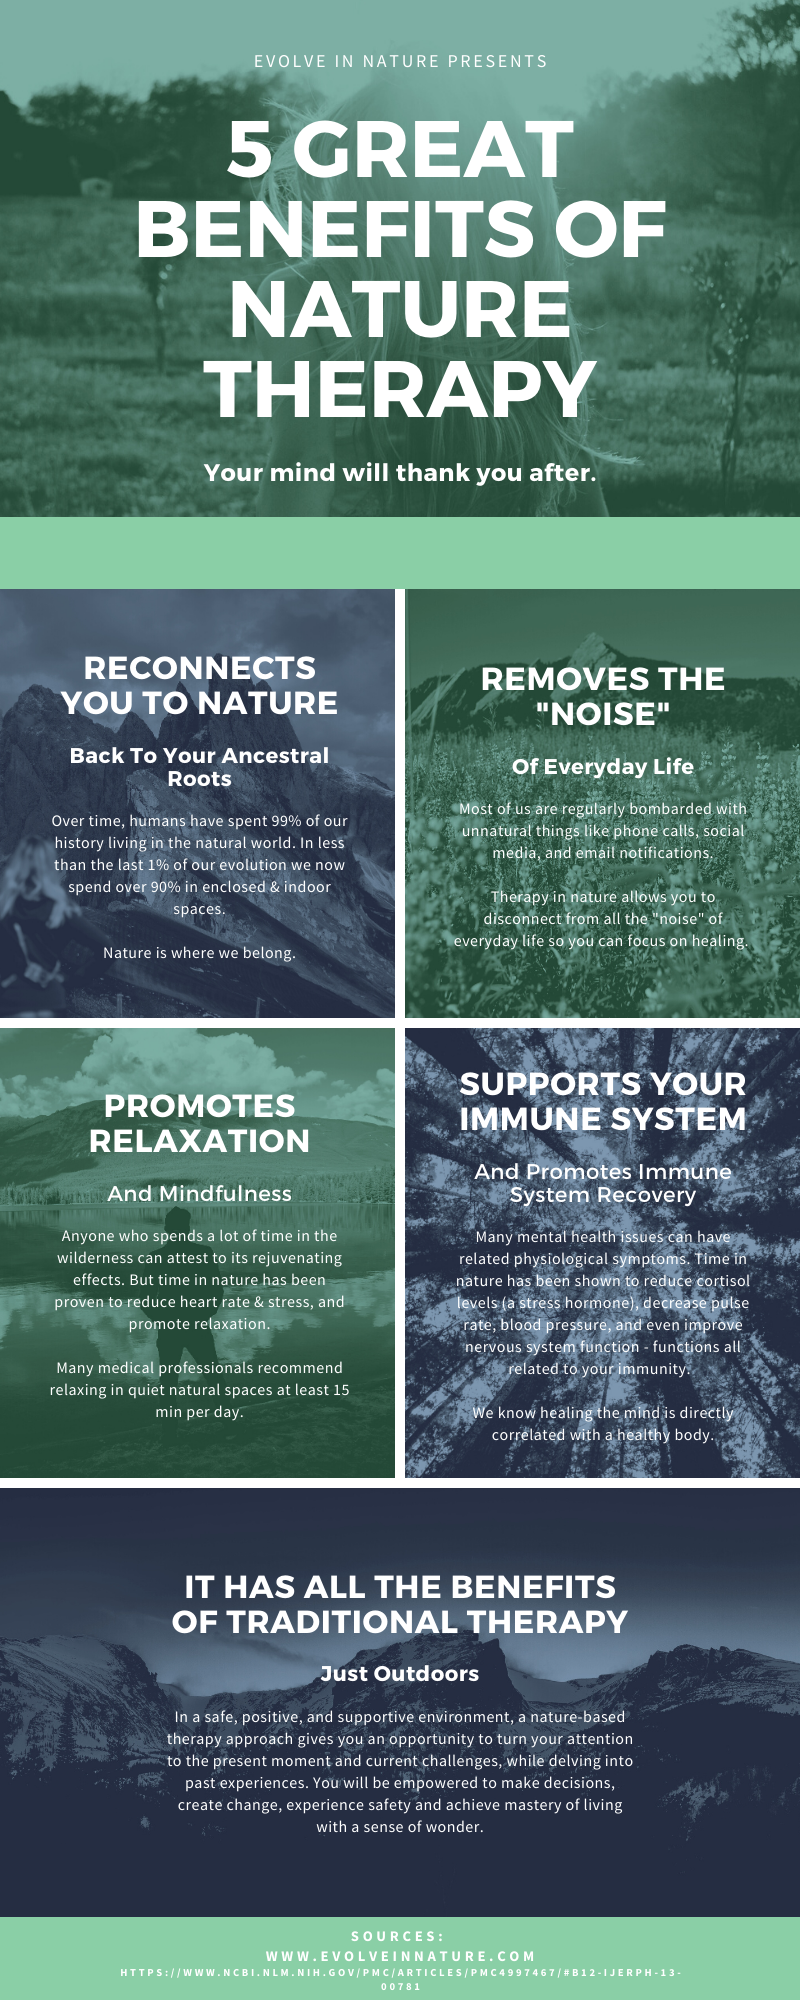 5 Benefits of Nature Therapy Infographic.png